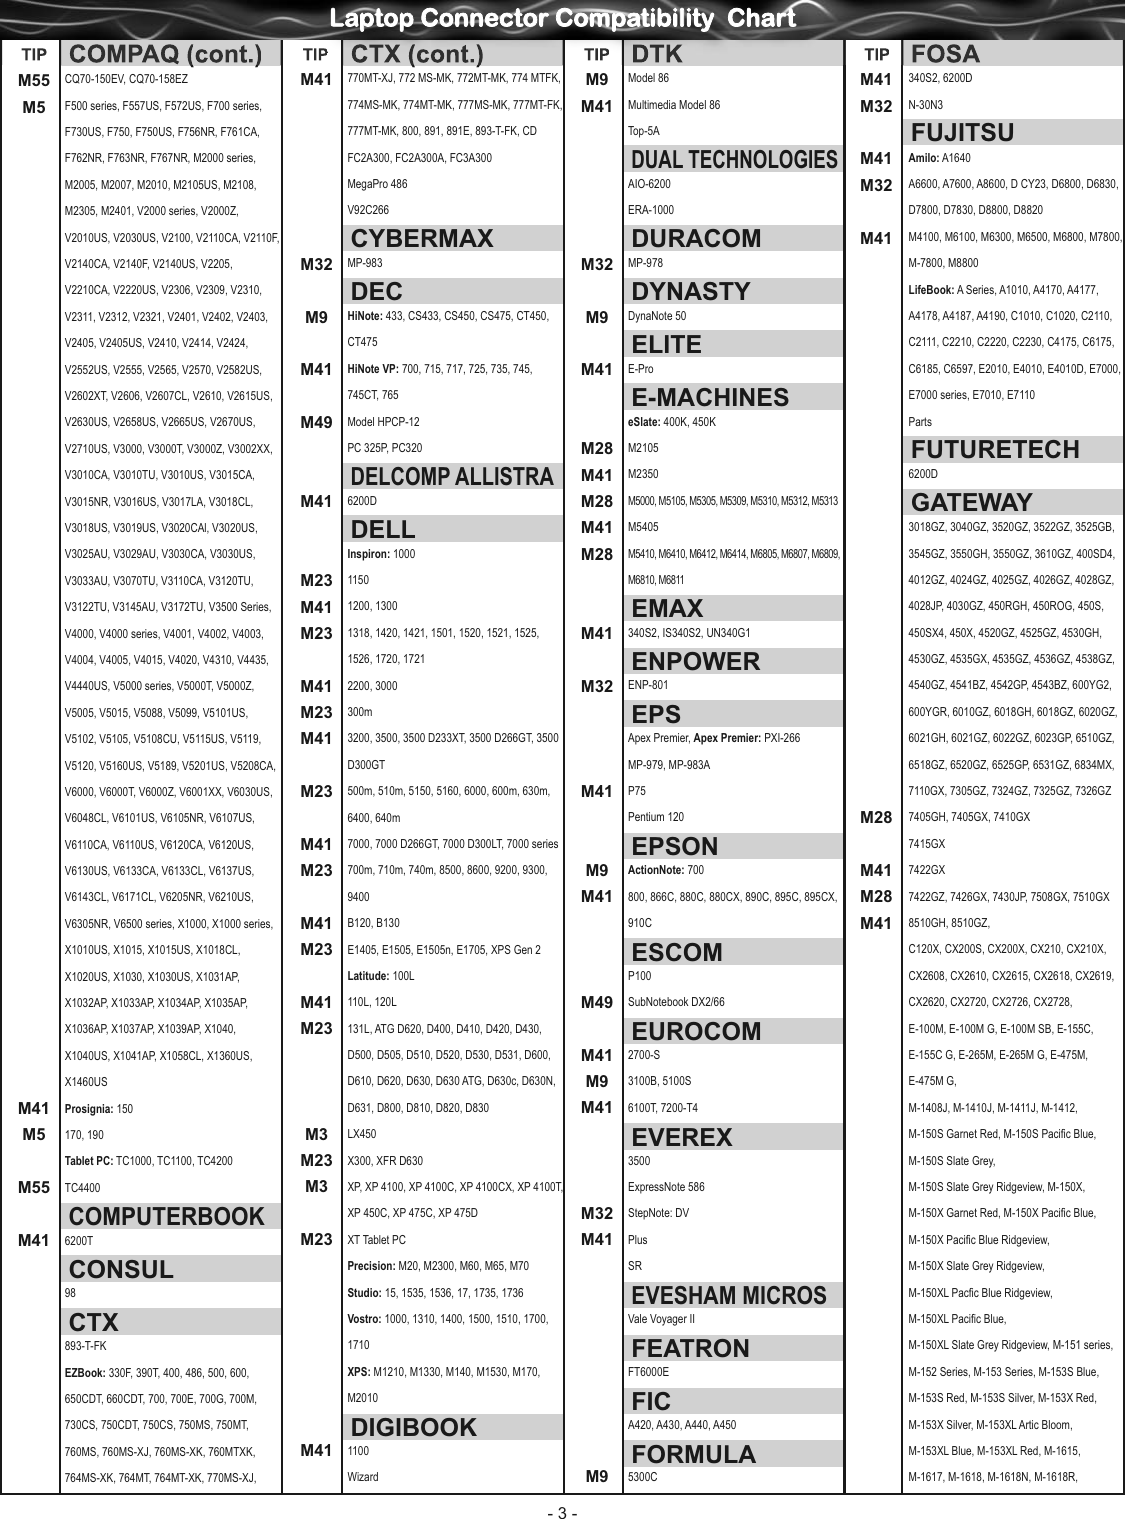 Page 3 of 10 - Rocket-Fish Rocket-Fish-Rf-Bprac2-Users-Manual- AC-5001BB_Connector_Compatibility_Chart_20090403_2  Rocket-fish-rf-bprac2-users-manual